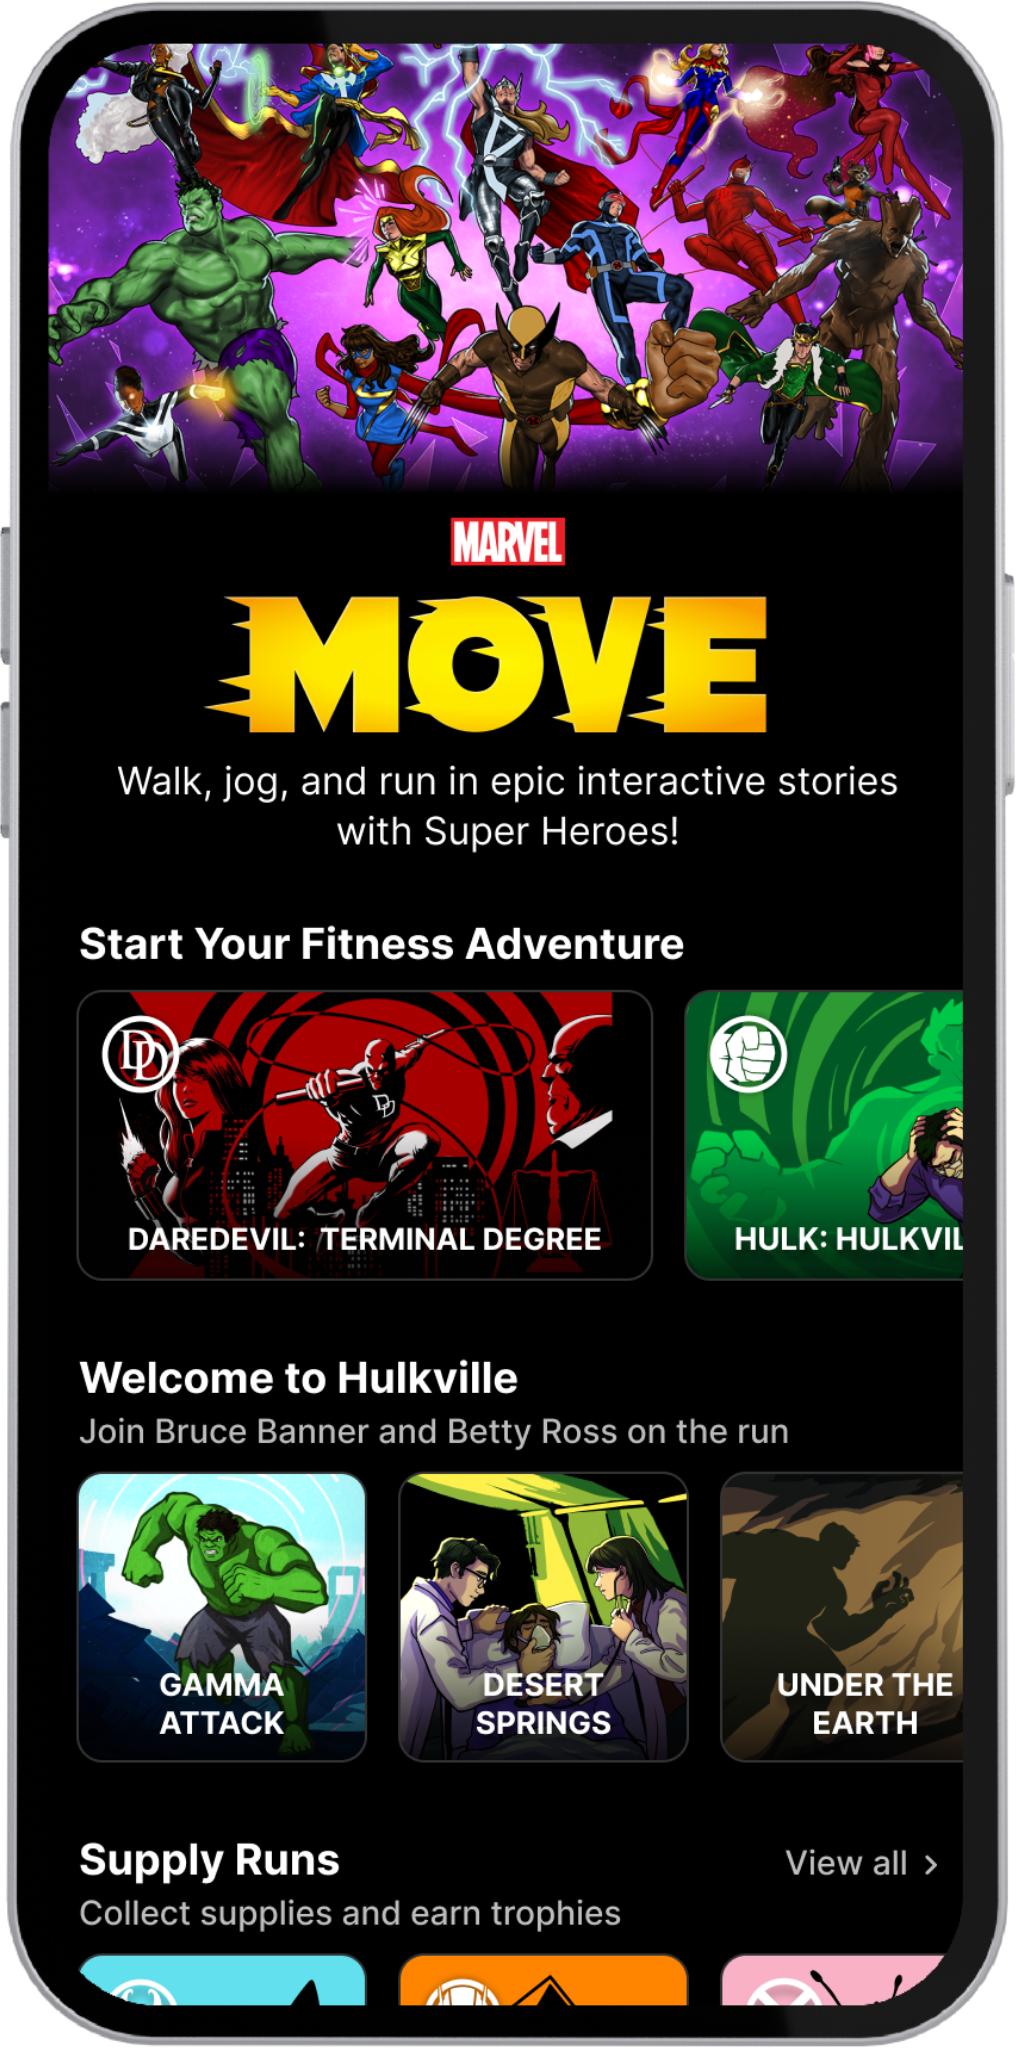 Marvel Move - Home Screen.png